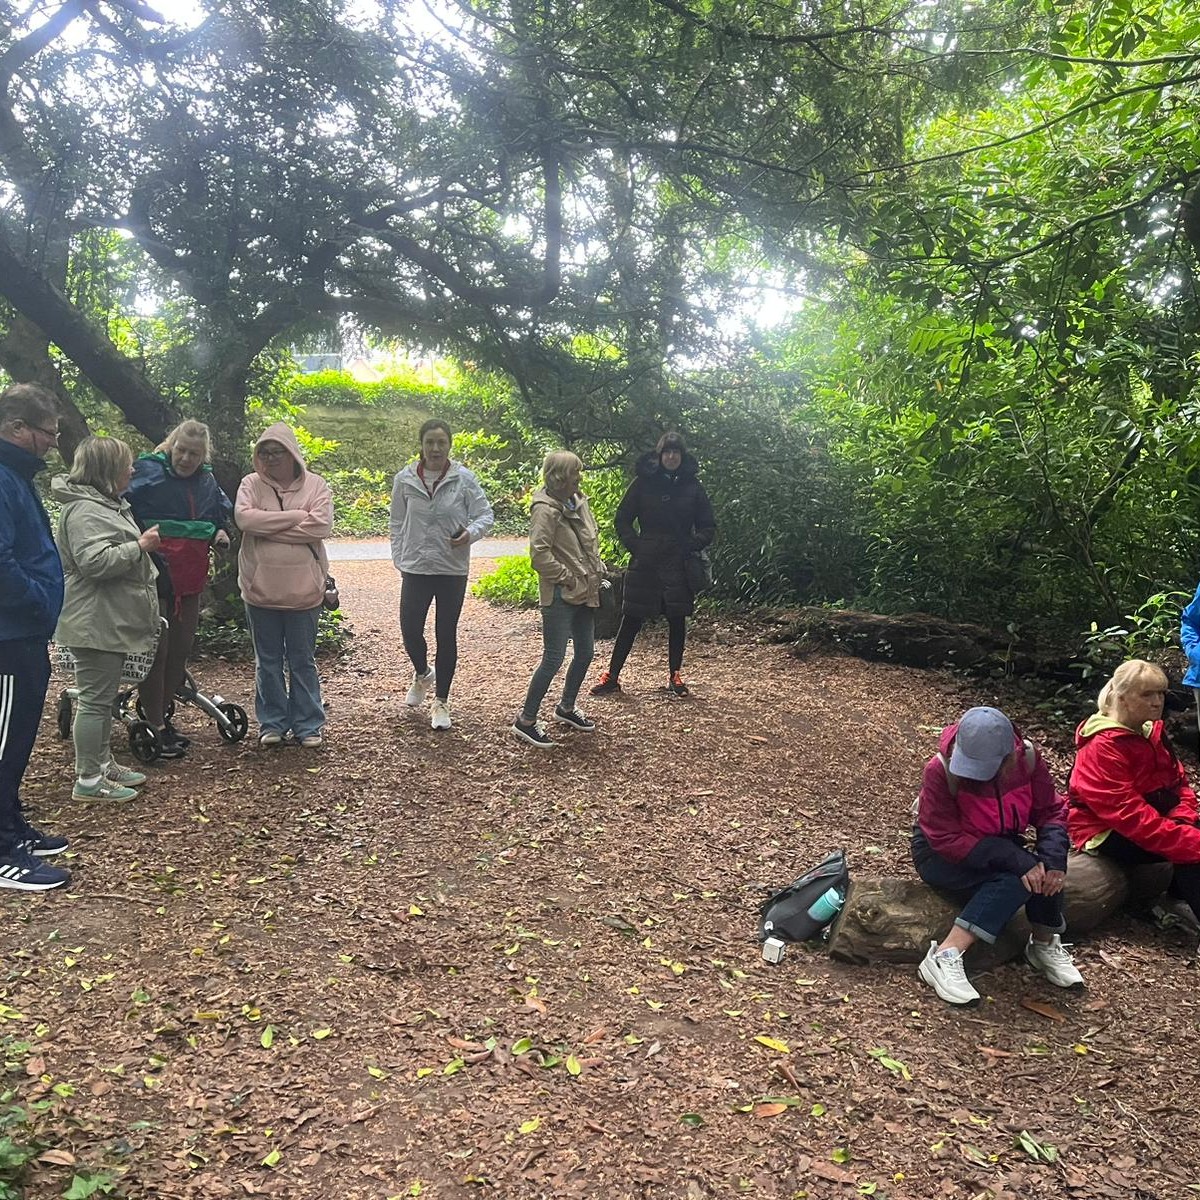 A great start to the 1st @fingalcoco Woodlands For Health walk in @newbridgehf yesterday as 26 people got involved on the walk with @HSEchoDNCC and @empowerfingal - well done everyone! 👏🏼
#YourMentalHealth